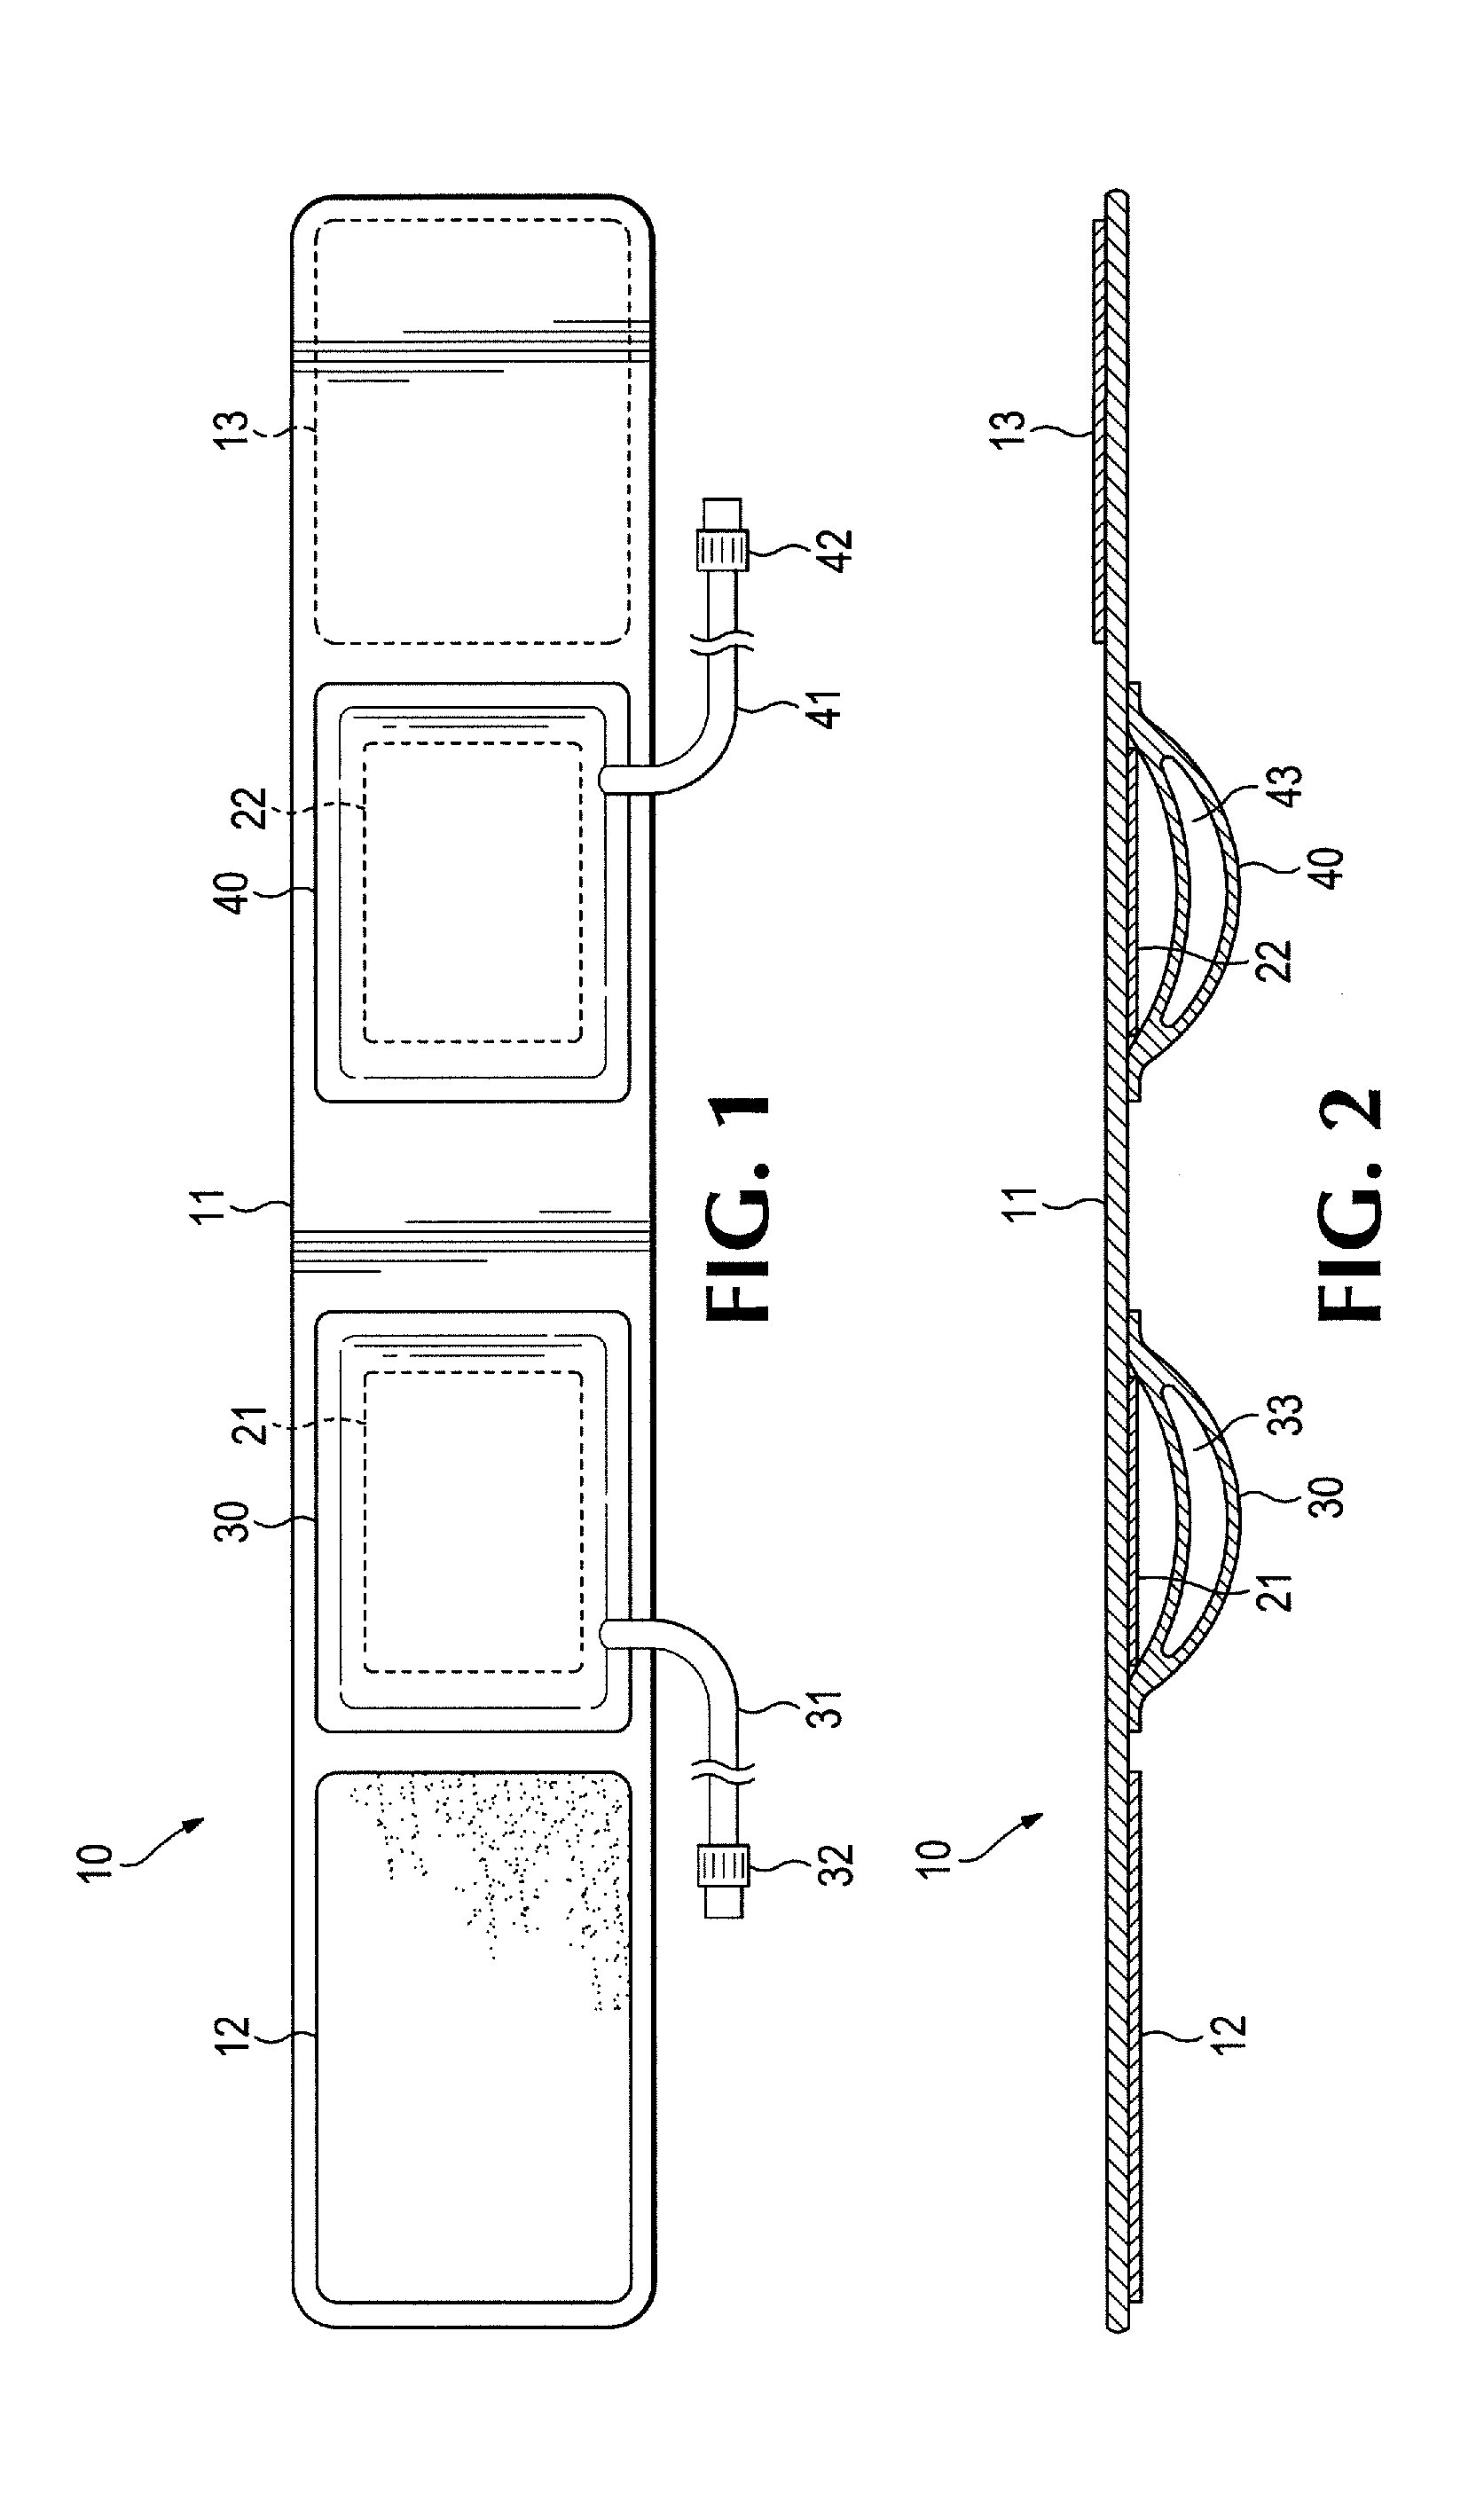 Apparatus and Method of Use for an Adjustable Radial and Ulnar Compression Wristband